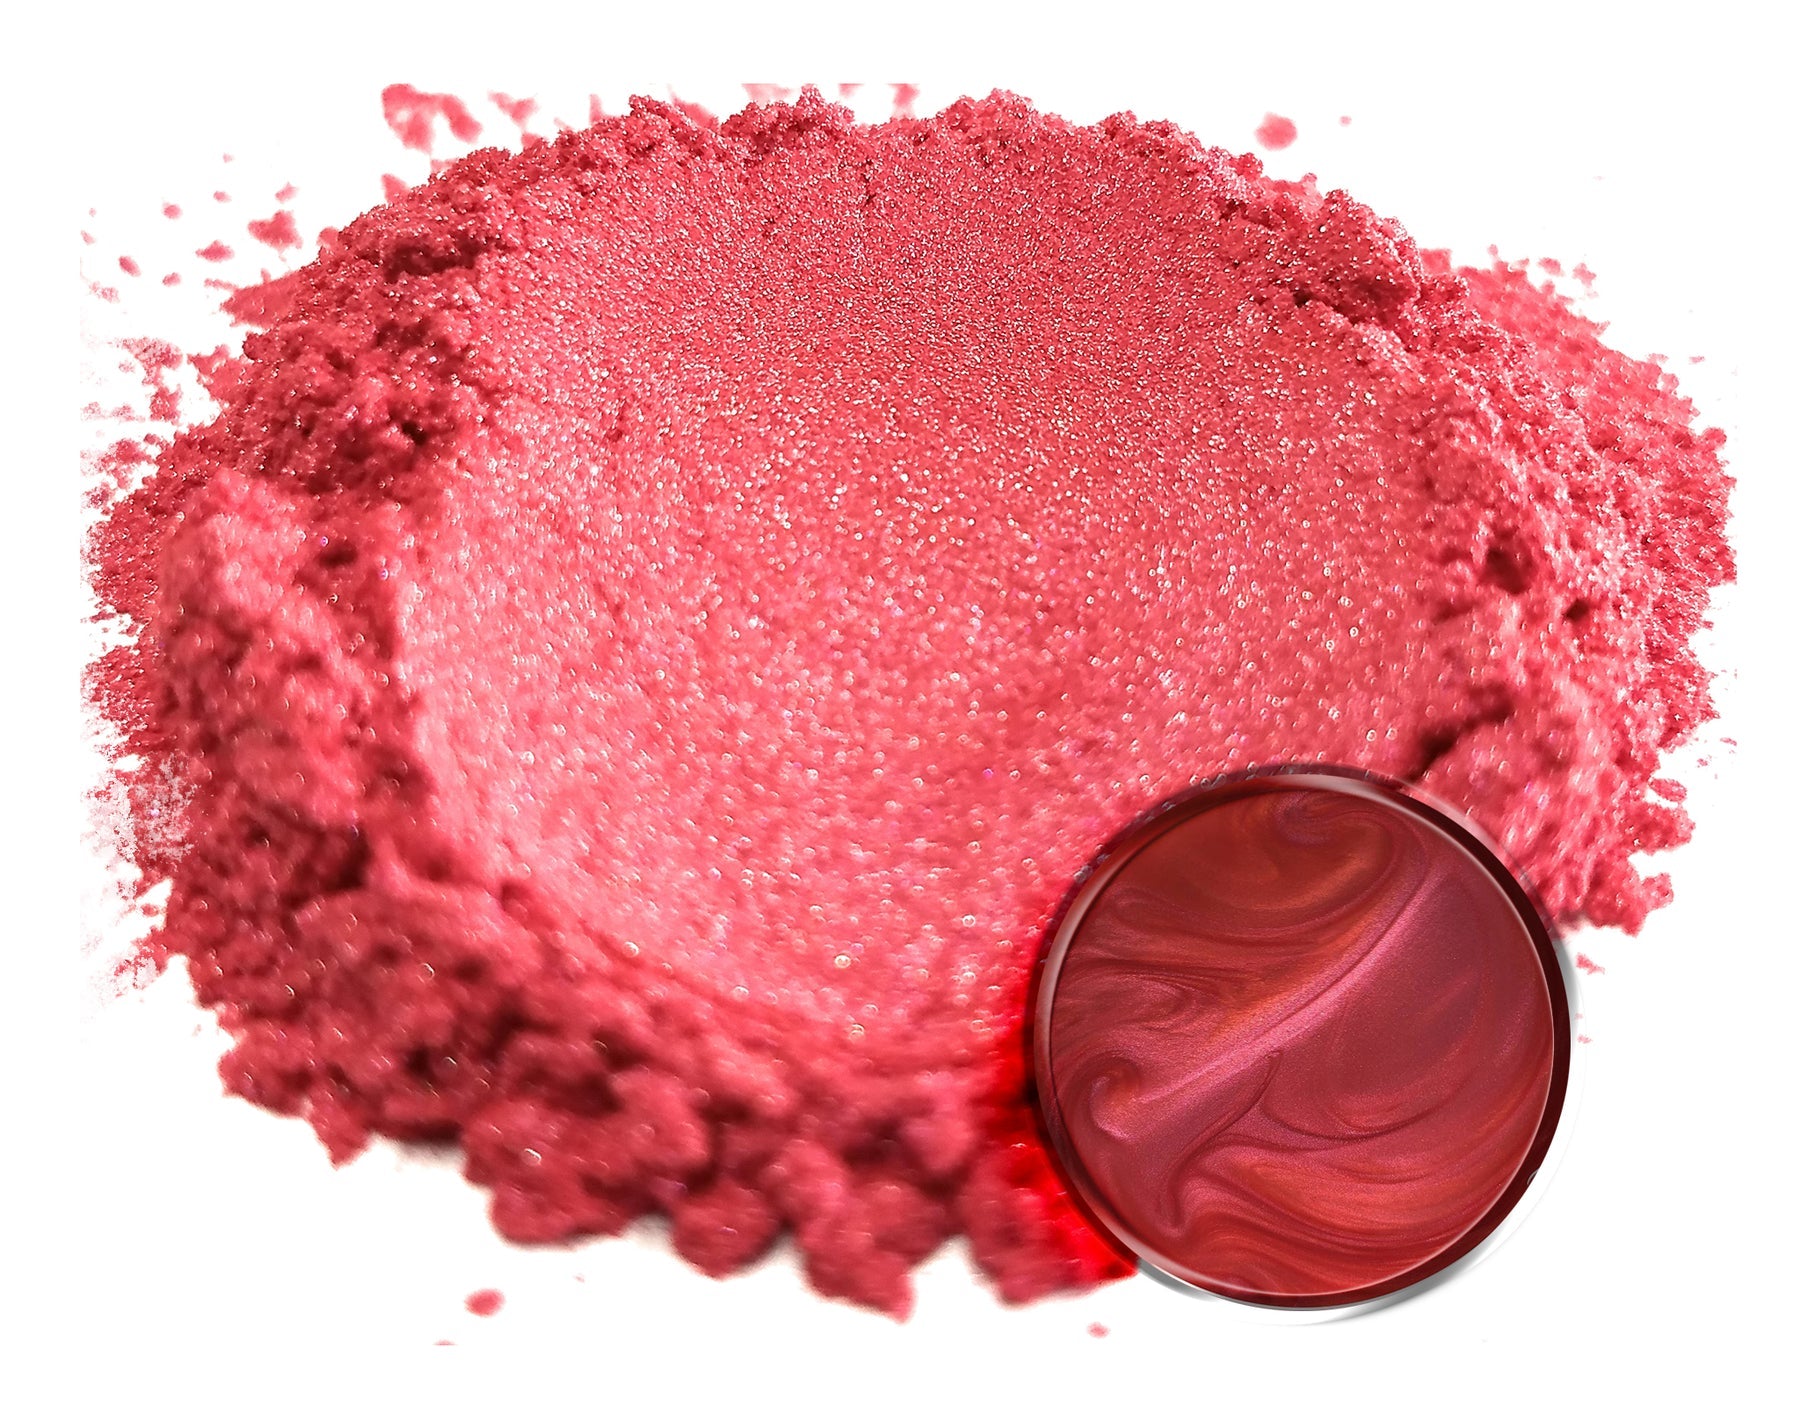 Powdered pigment by eye candy pigments for epoxy resin projects. In the color Indian Red.